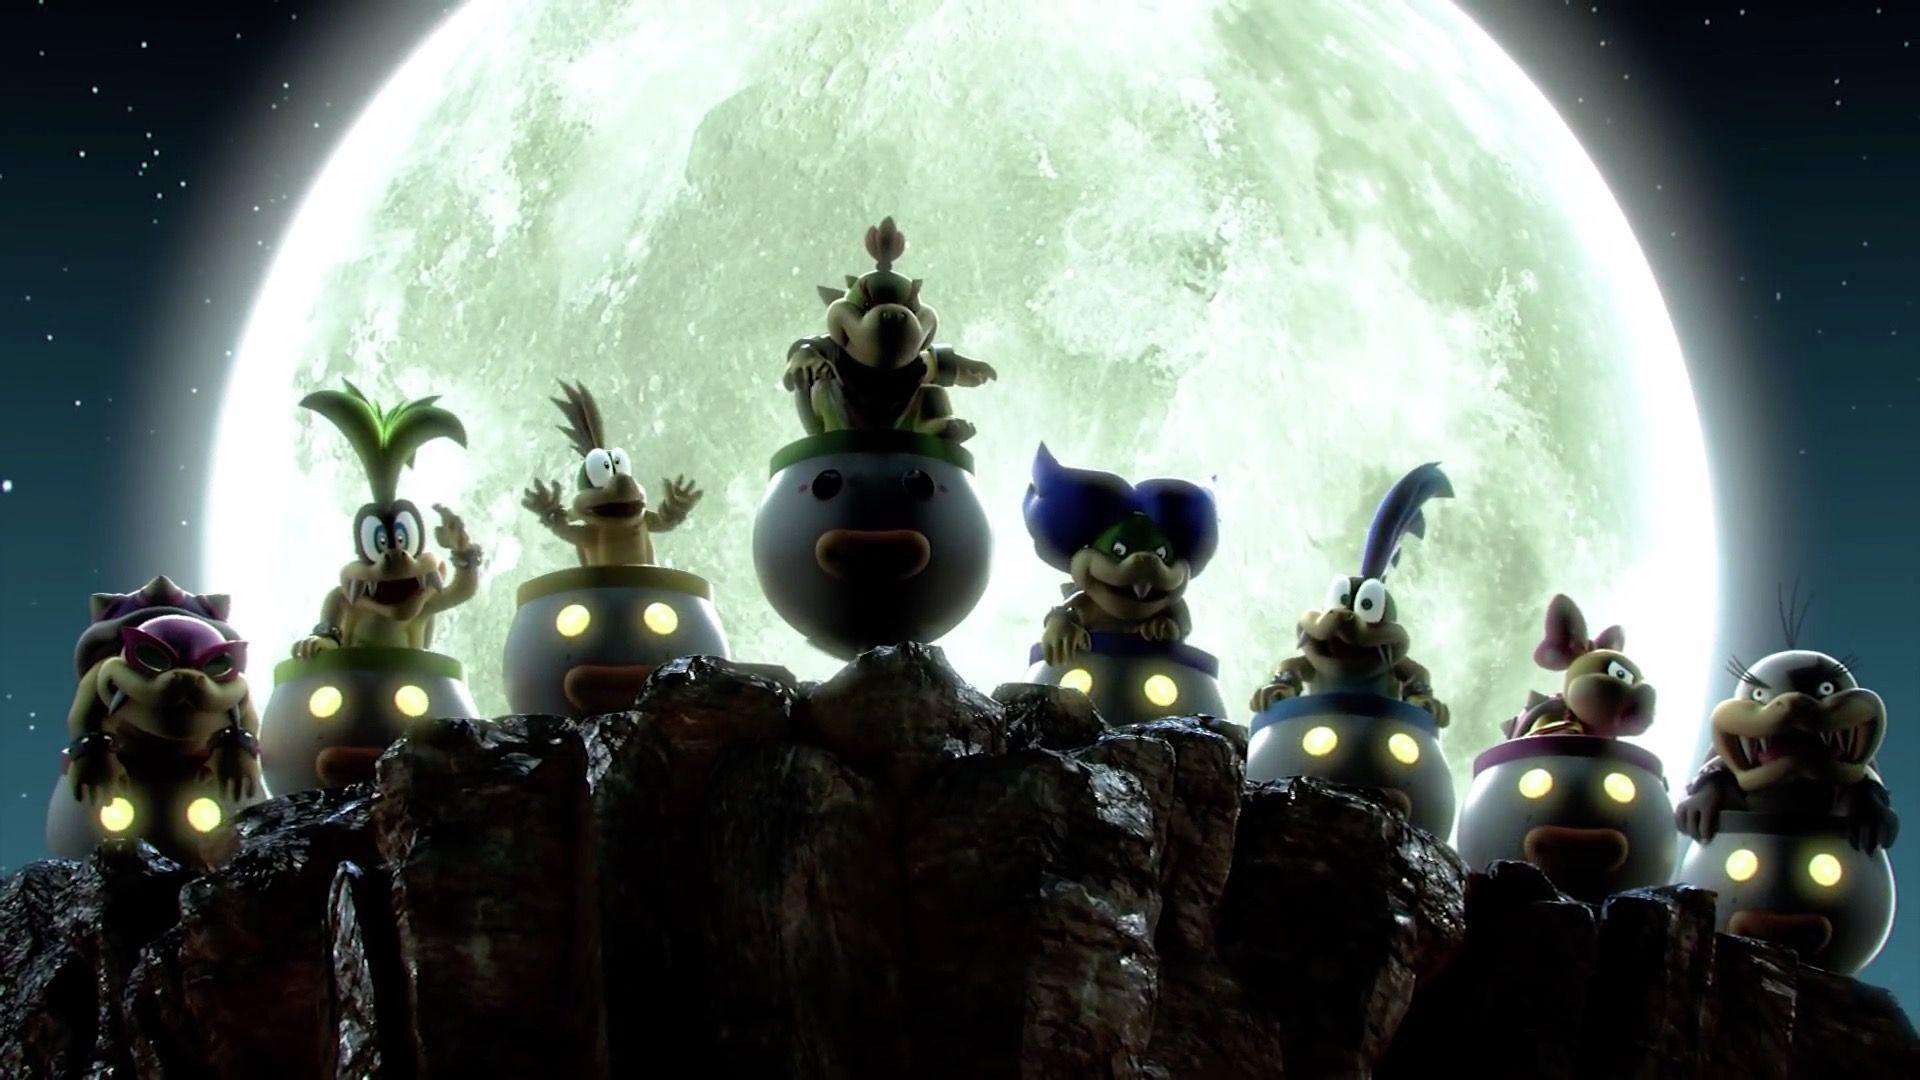 Characters eligible for Super Smash Bros. roster were decided